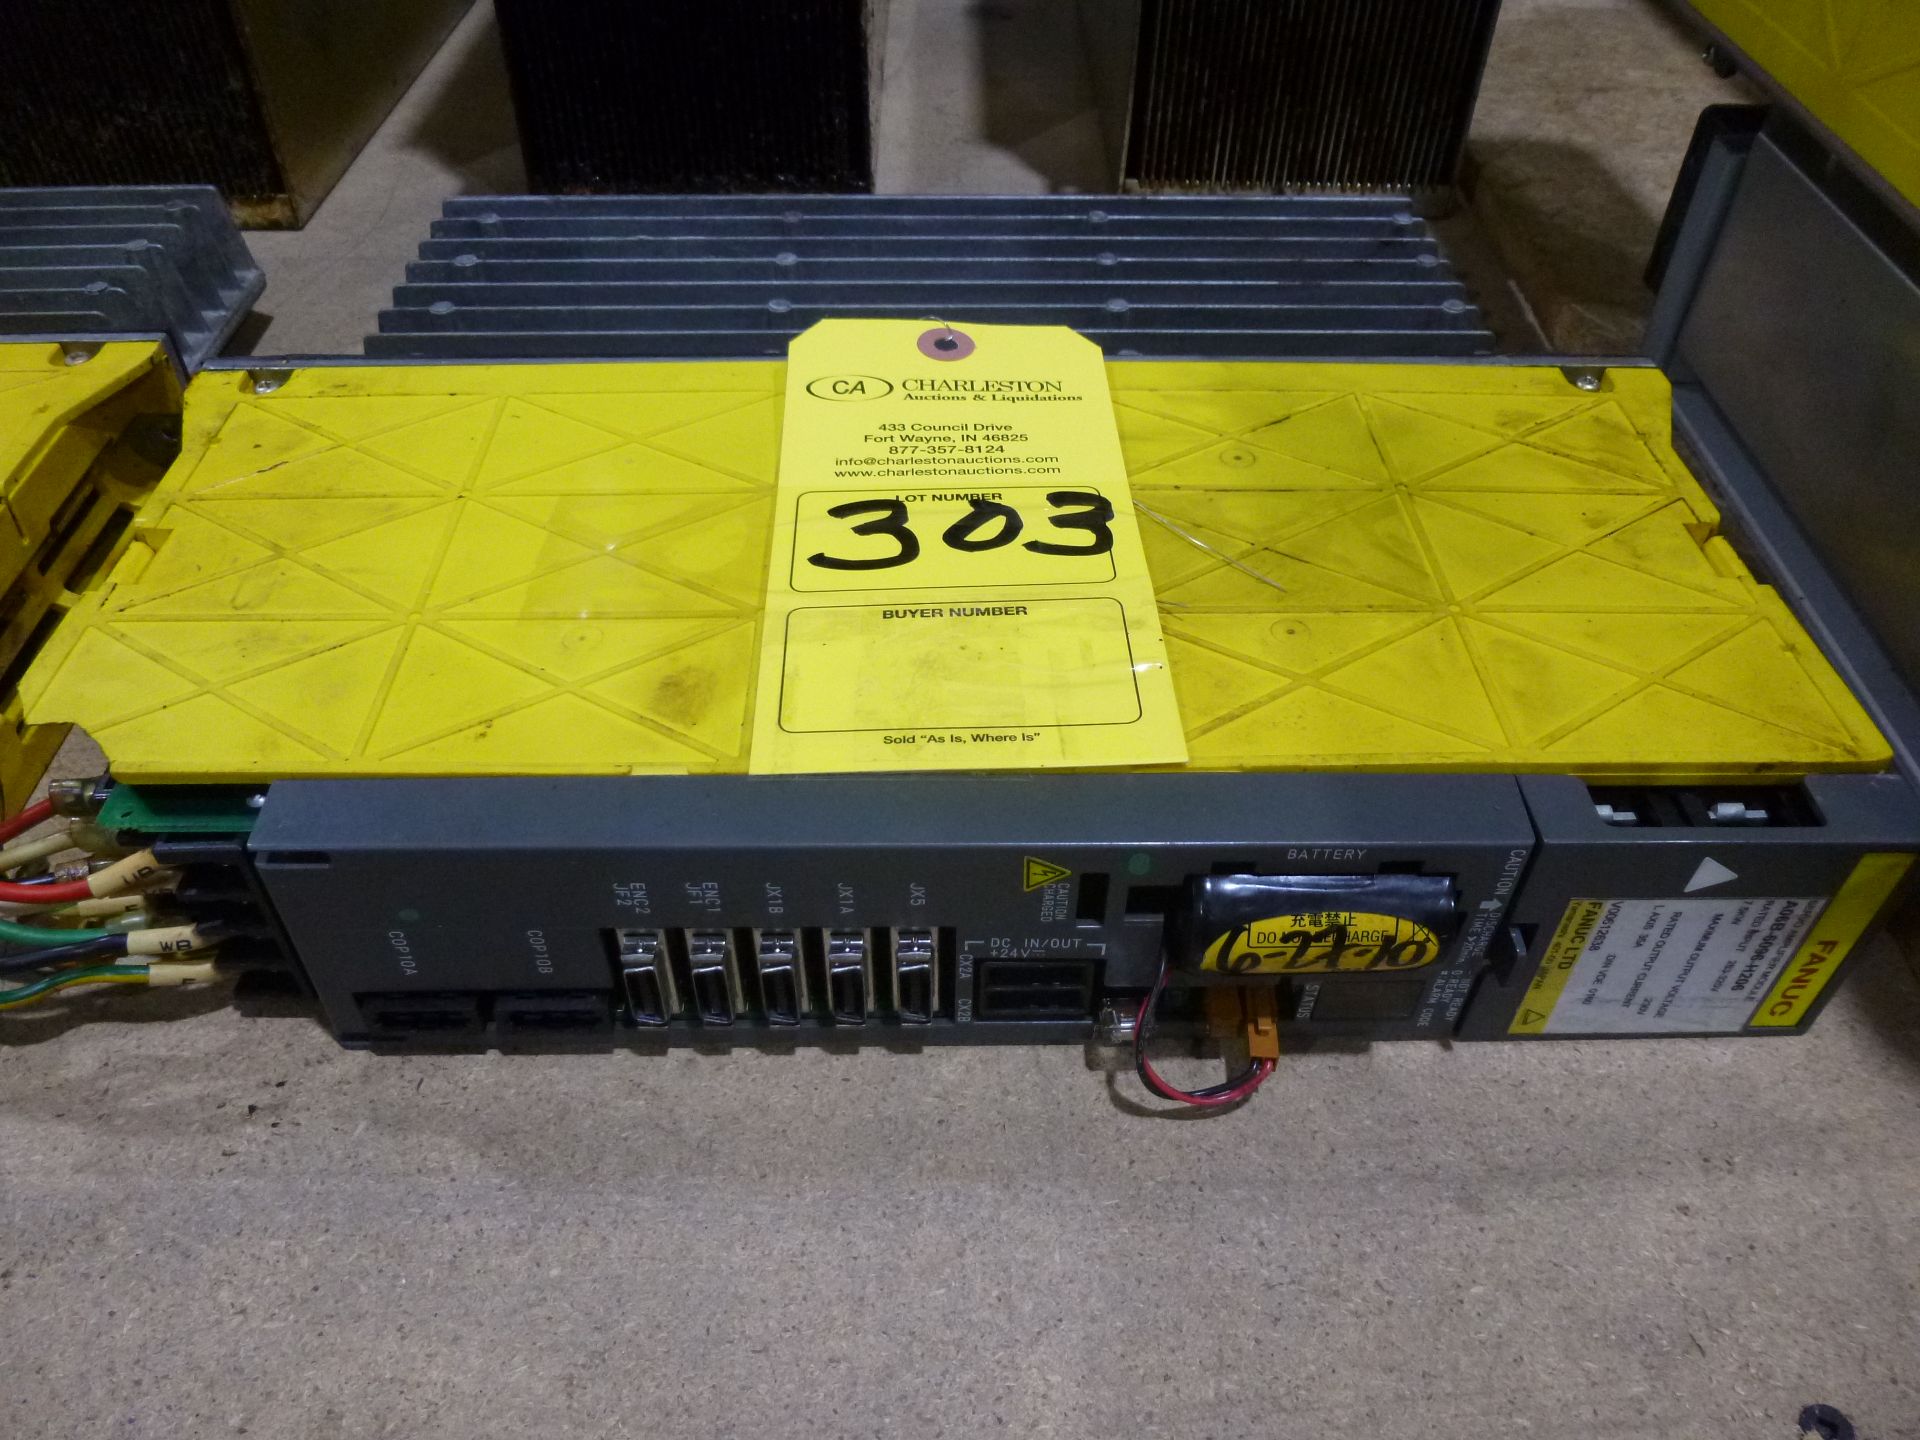 Fanuc power supply module model A06B-6087-H126, as always with Brolyn LLC auctions, all lots can